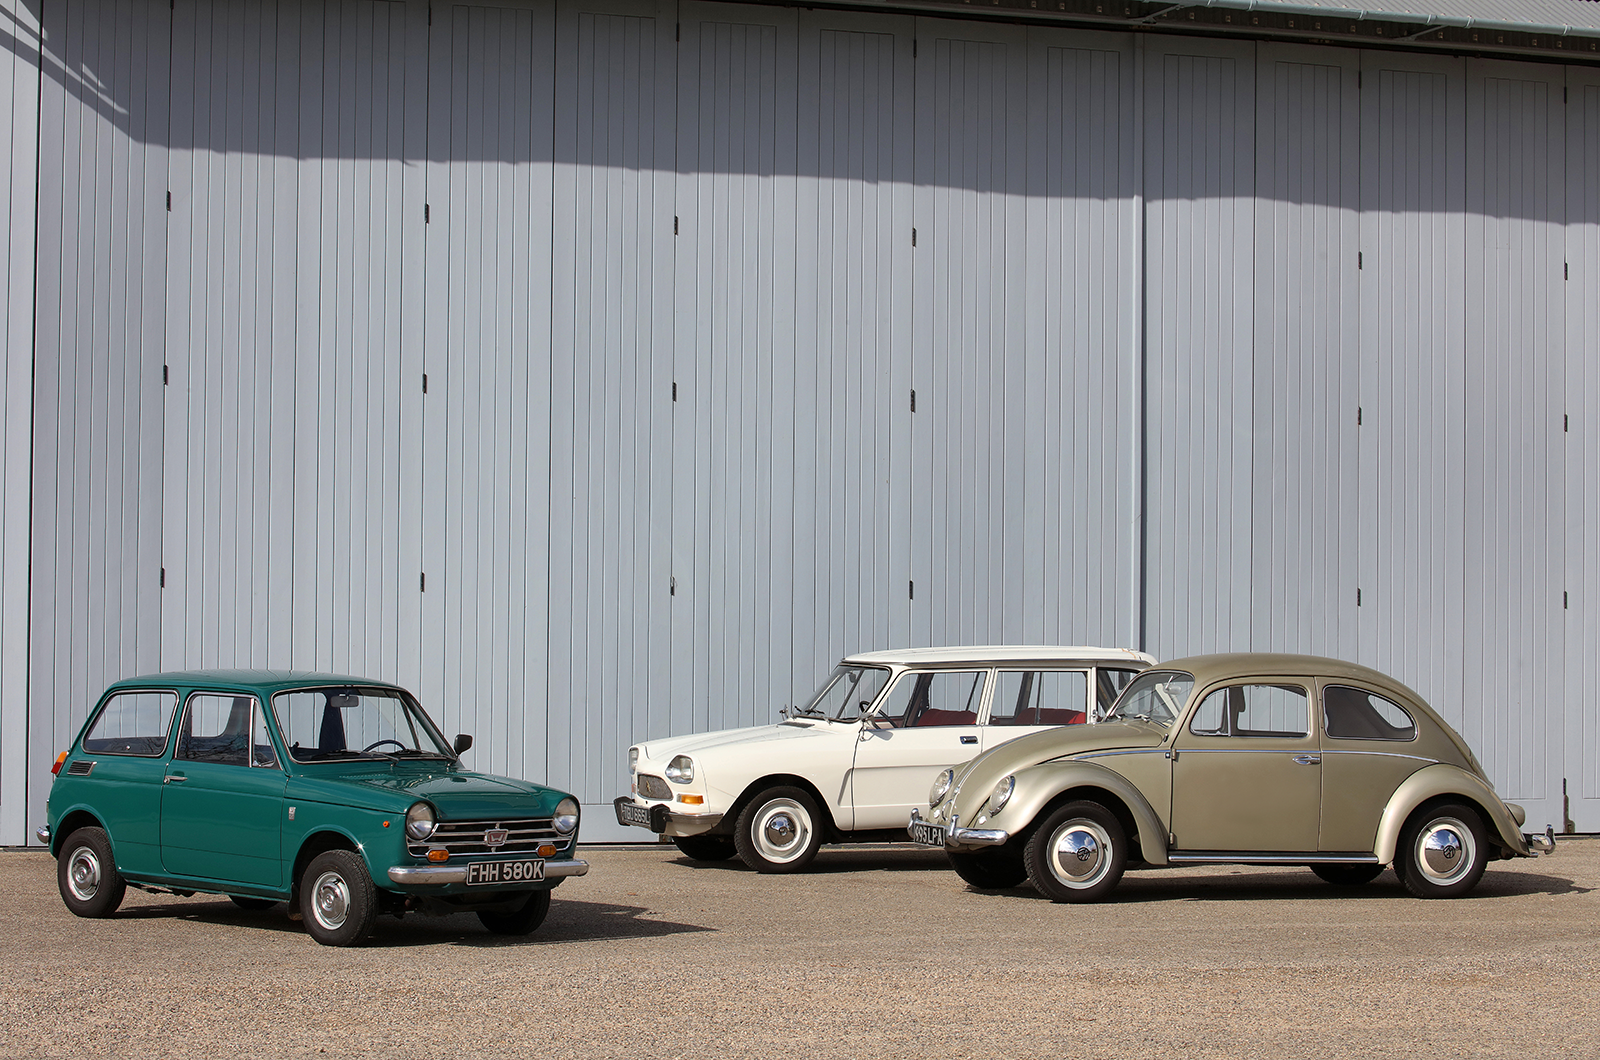 Classic & Sports Car – Love is in the air: Honda N360, Citroën Ami 8 and Volkswagen Beetle